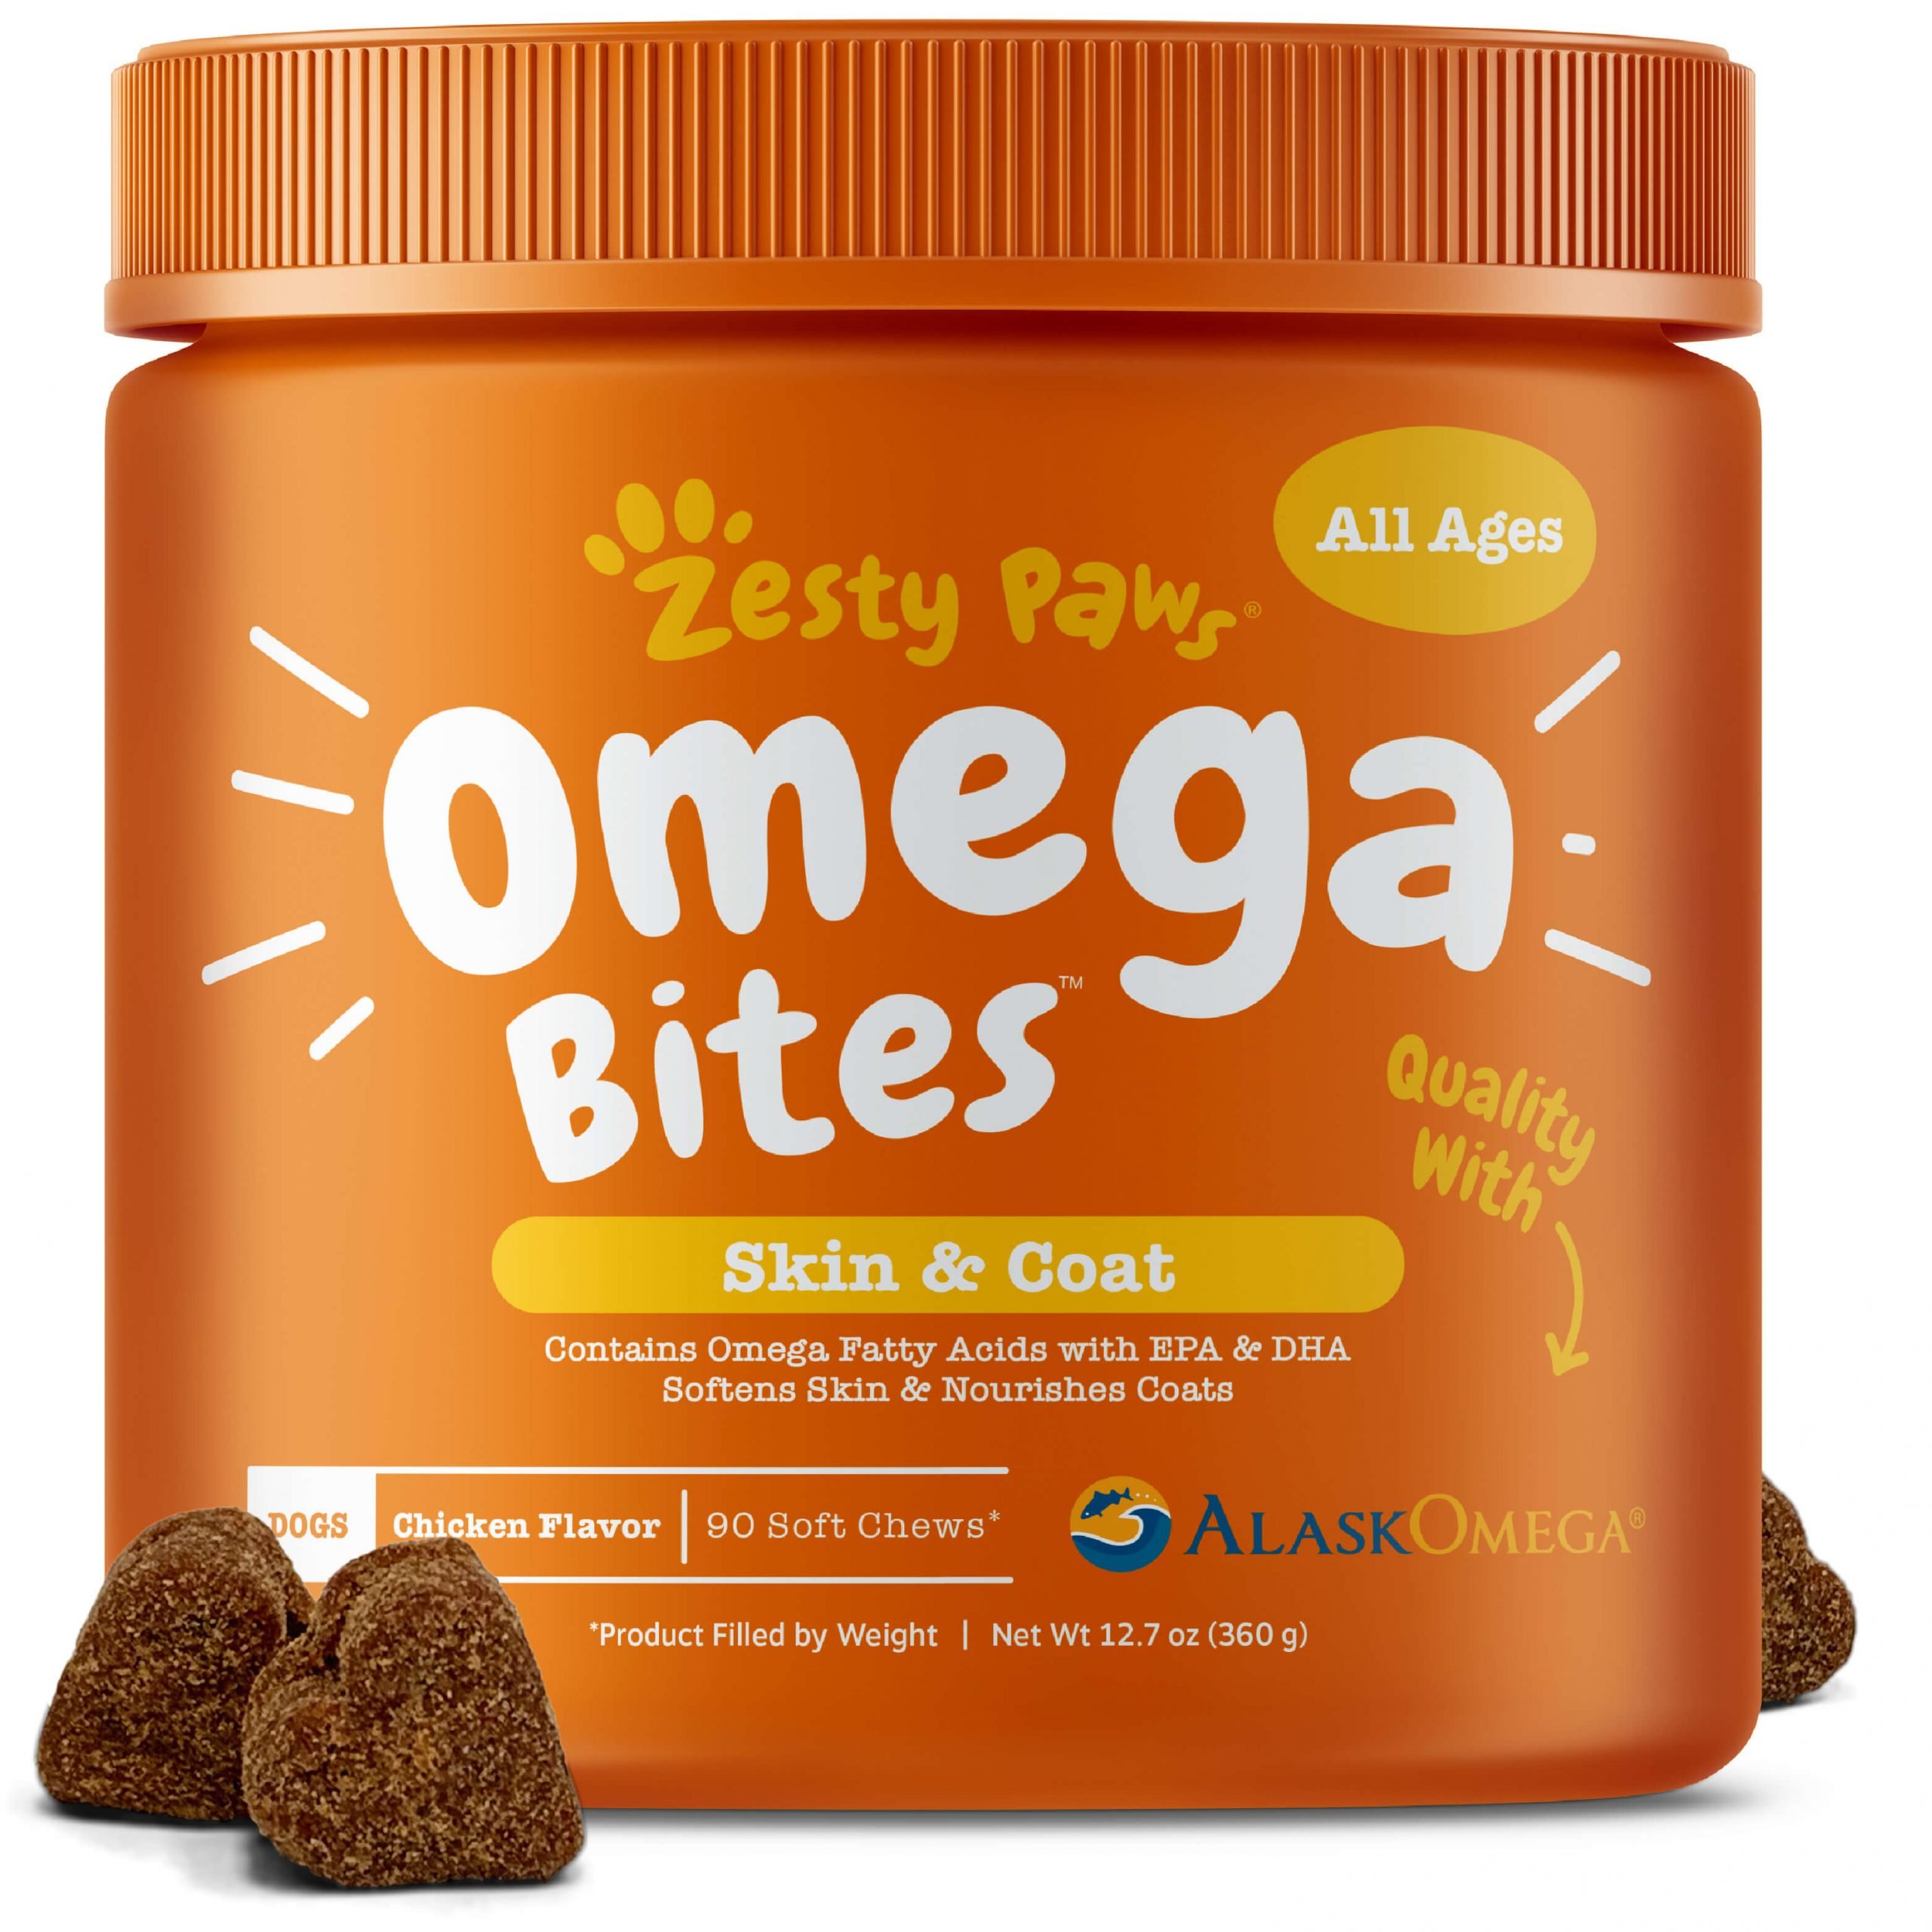 Zesty Paws Omega 3 Chews for Dogs, With AlaskOmega Fish ...